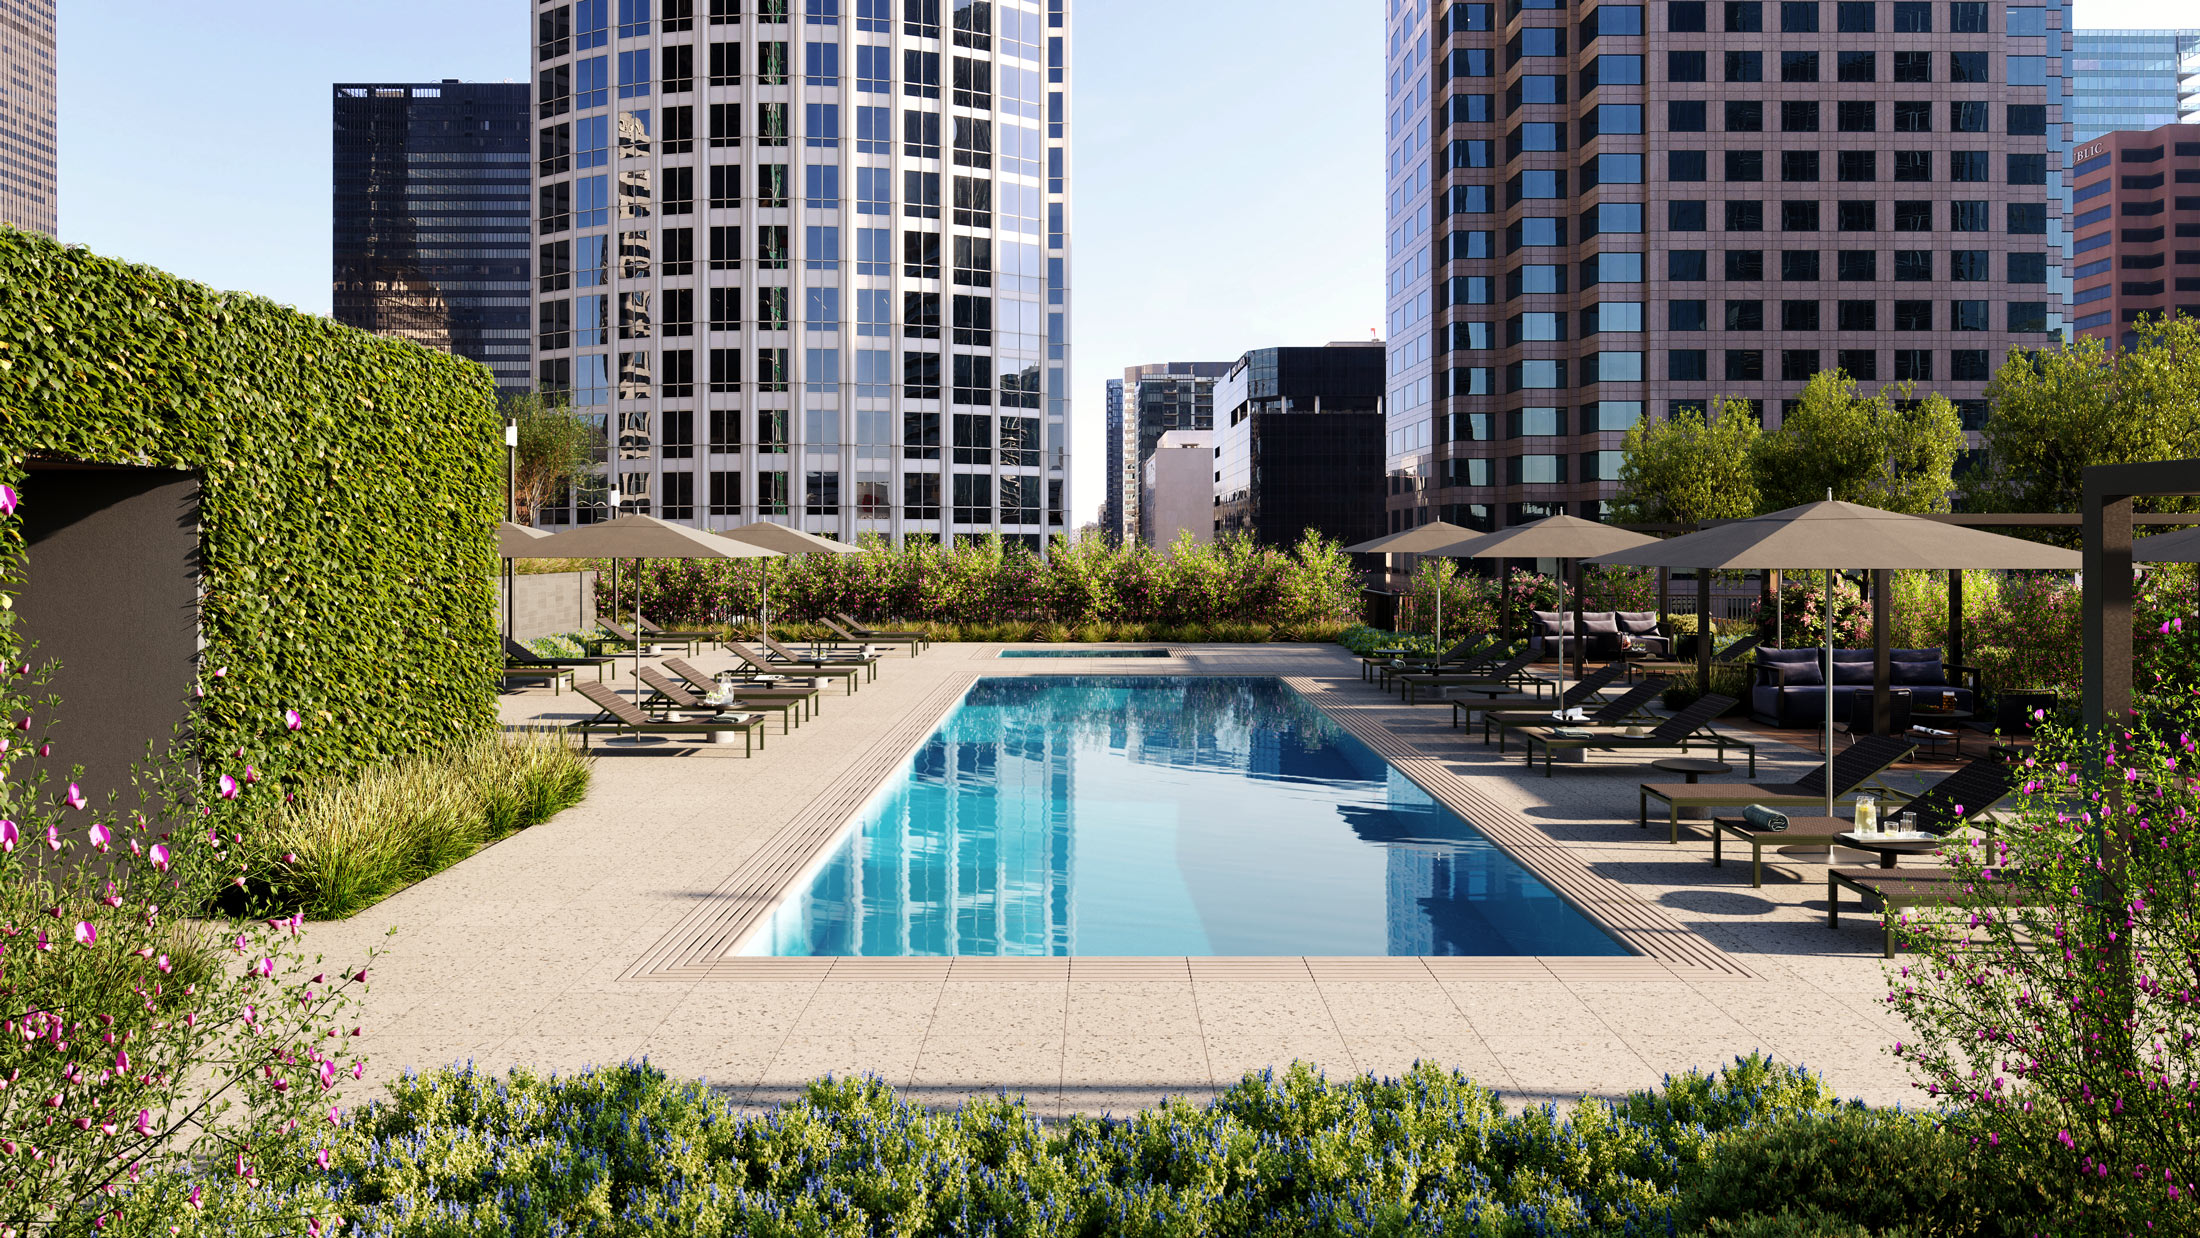 Architectural Rendering of the pool of the 755 South Figueroa Street project located in Los Angeles, California